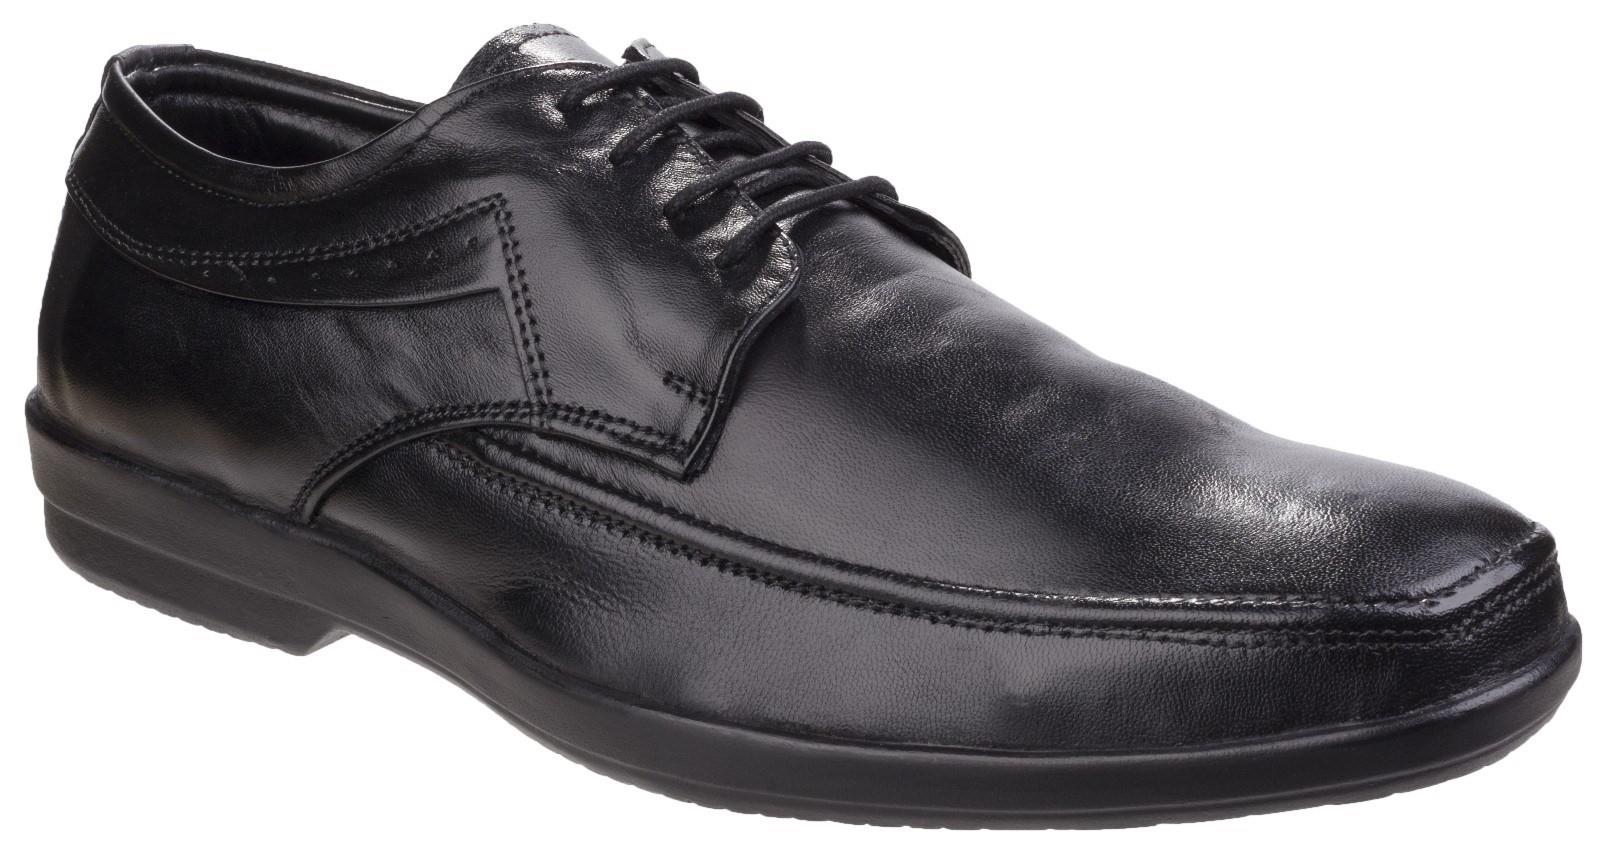 Fleet & Foster Dave black leather apron toe oxford formal lace-up shoe